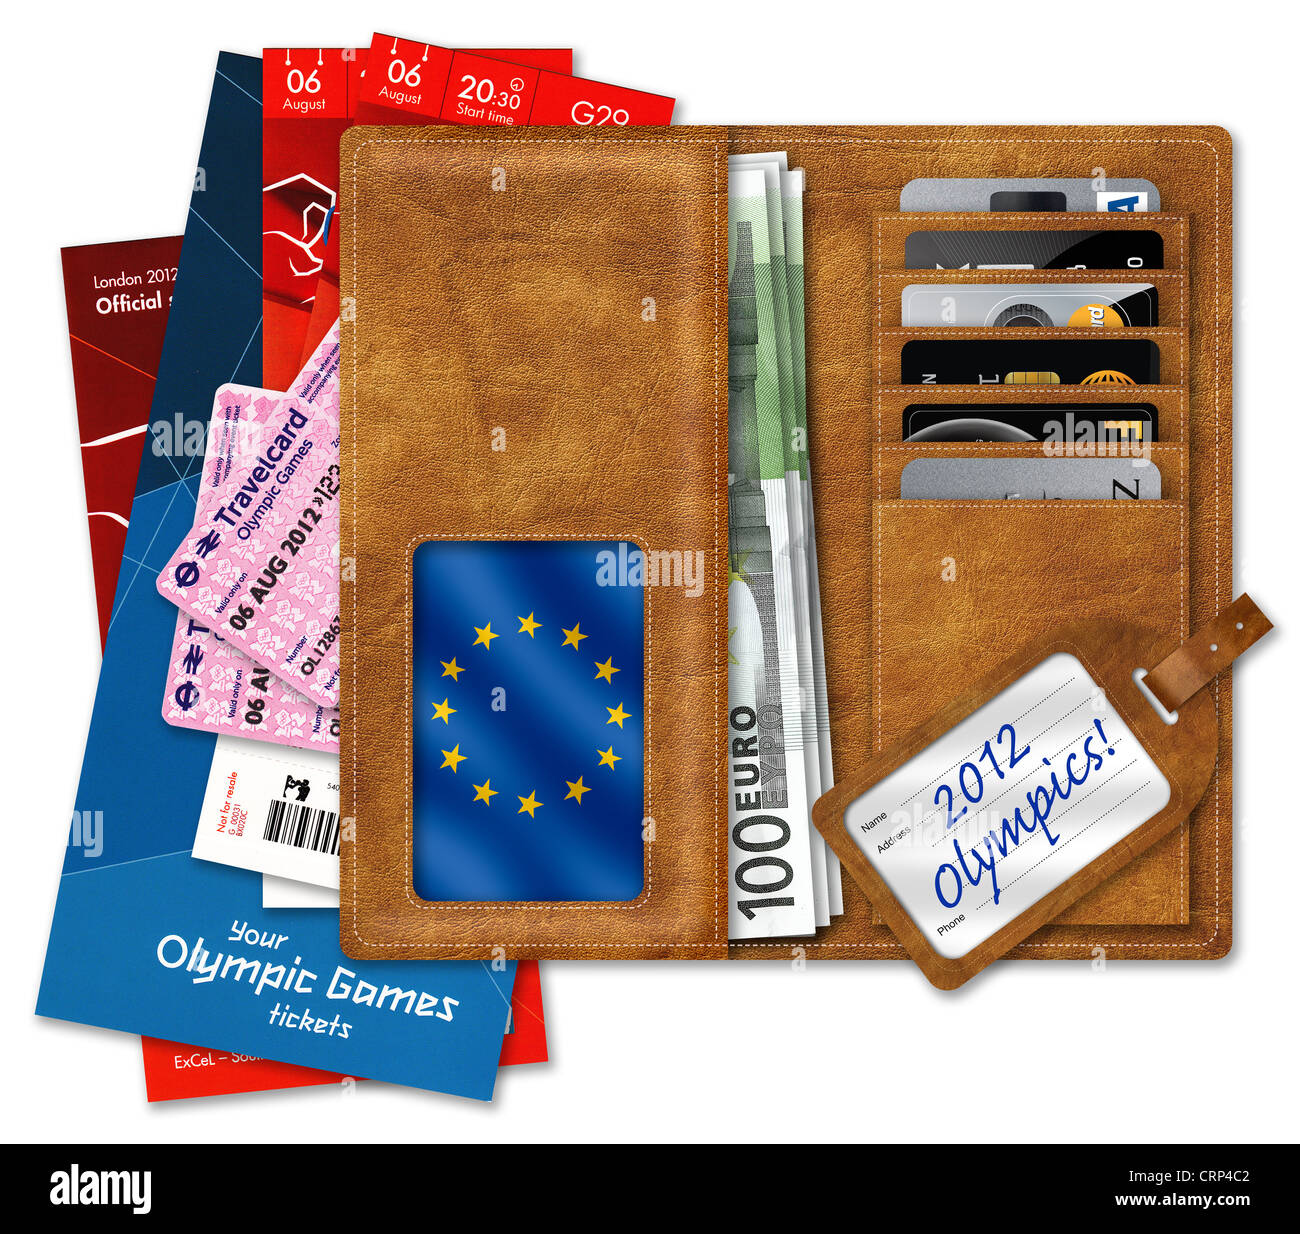 Olympic tickets & documents on wallet with Euros & credit cards, a picture of the Euro Flag & 2012 Olympics luggage label. Stock Photo